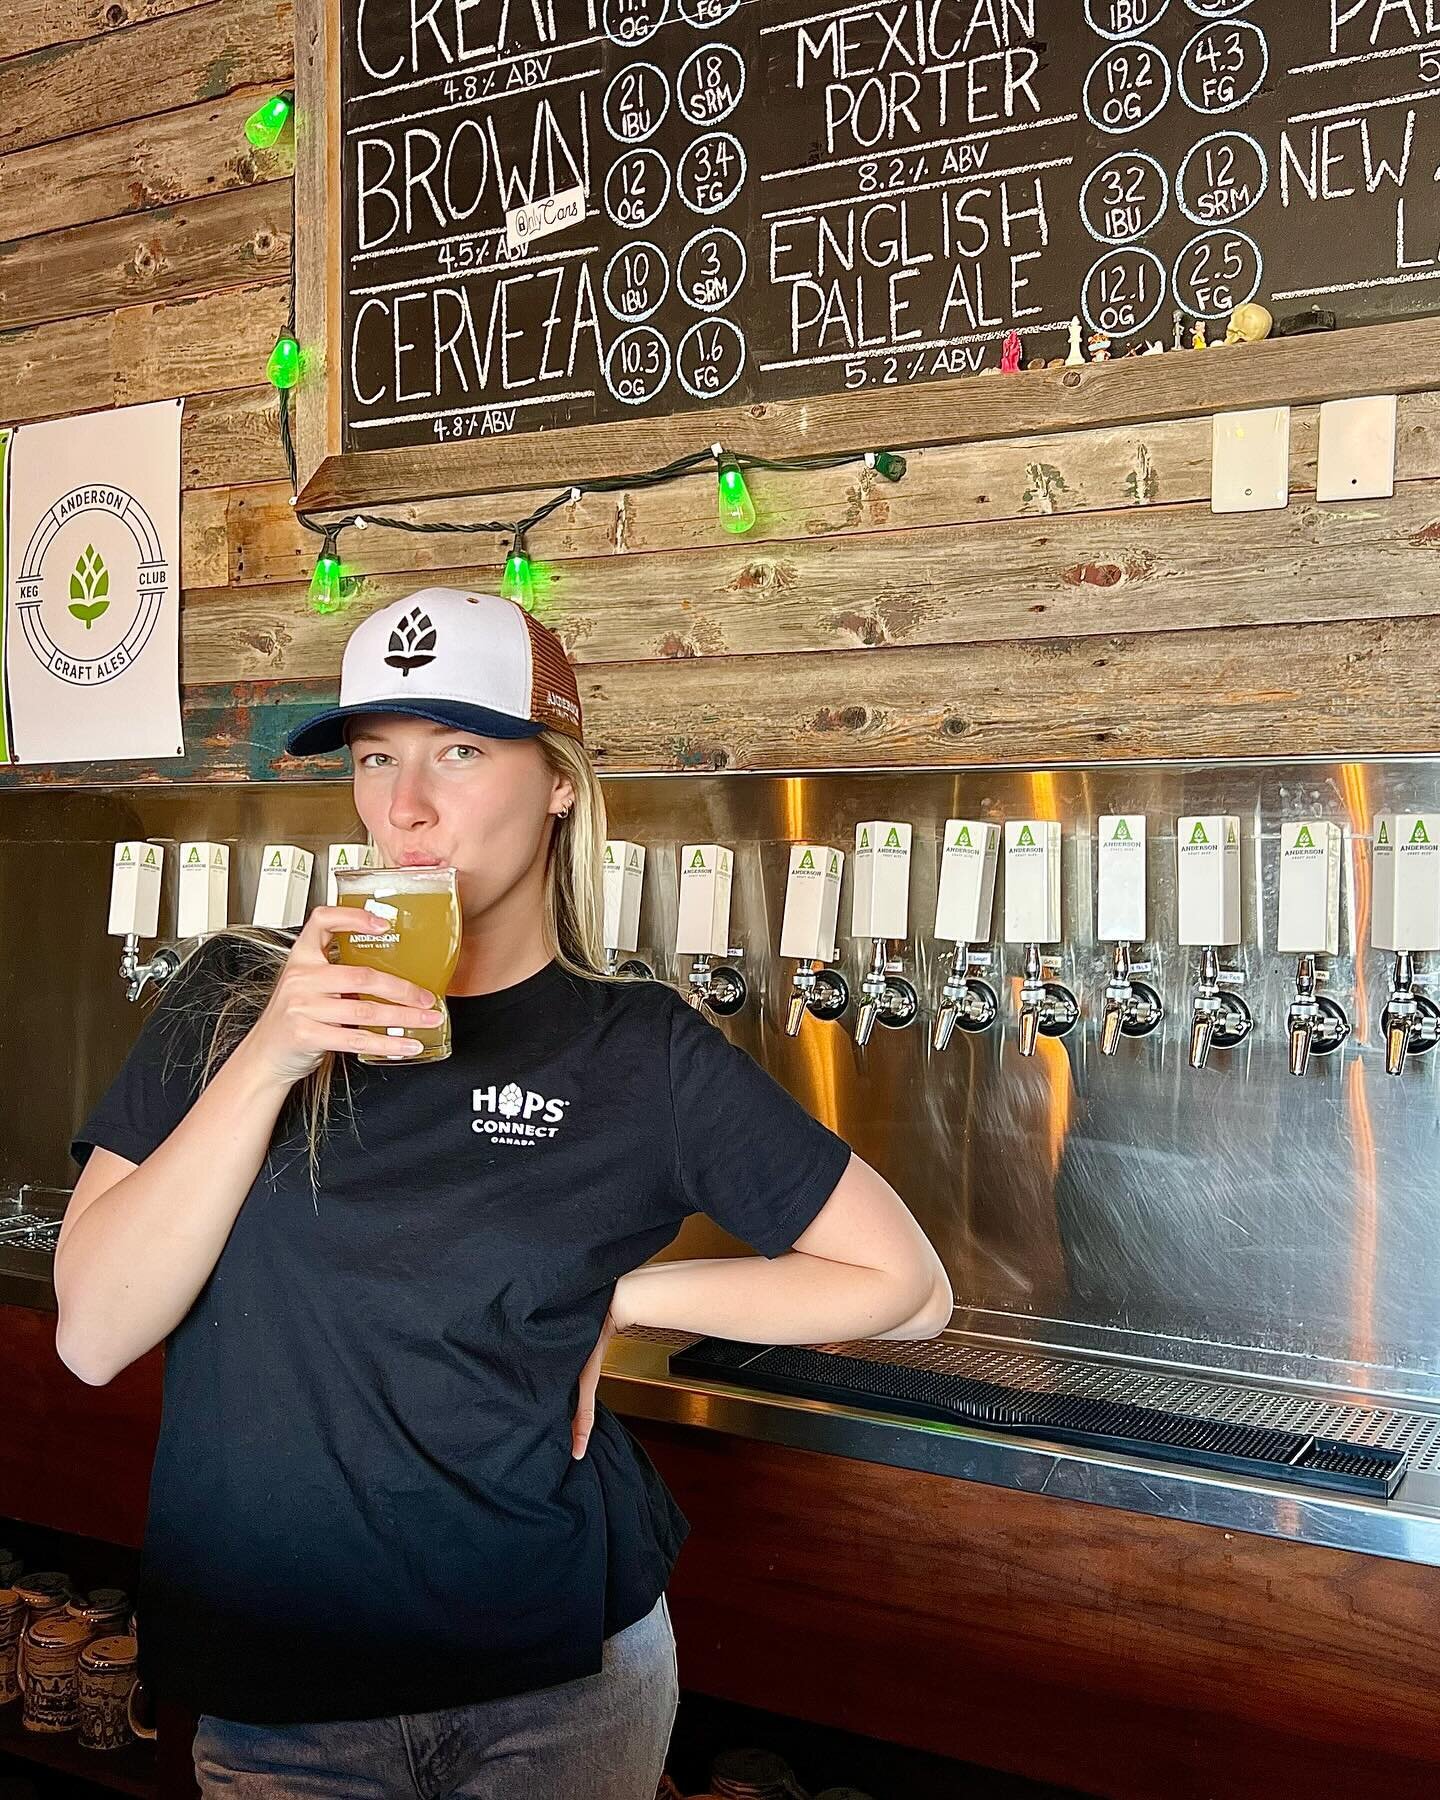 Sunny days for ball caps and beer times!! 

Tunes on tap today from 1-4pm. 
Private event tonight at 6pm so seating will be limited!!

Grab a cold one and some sweet swag!